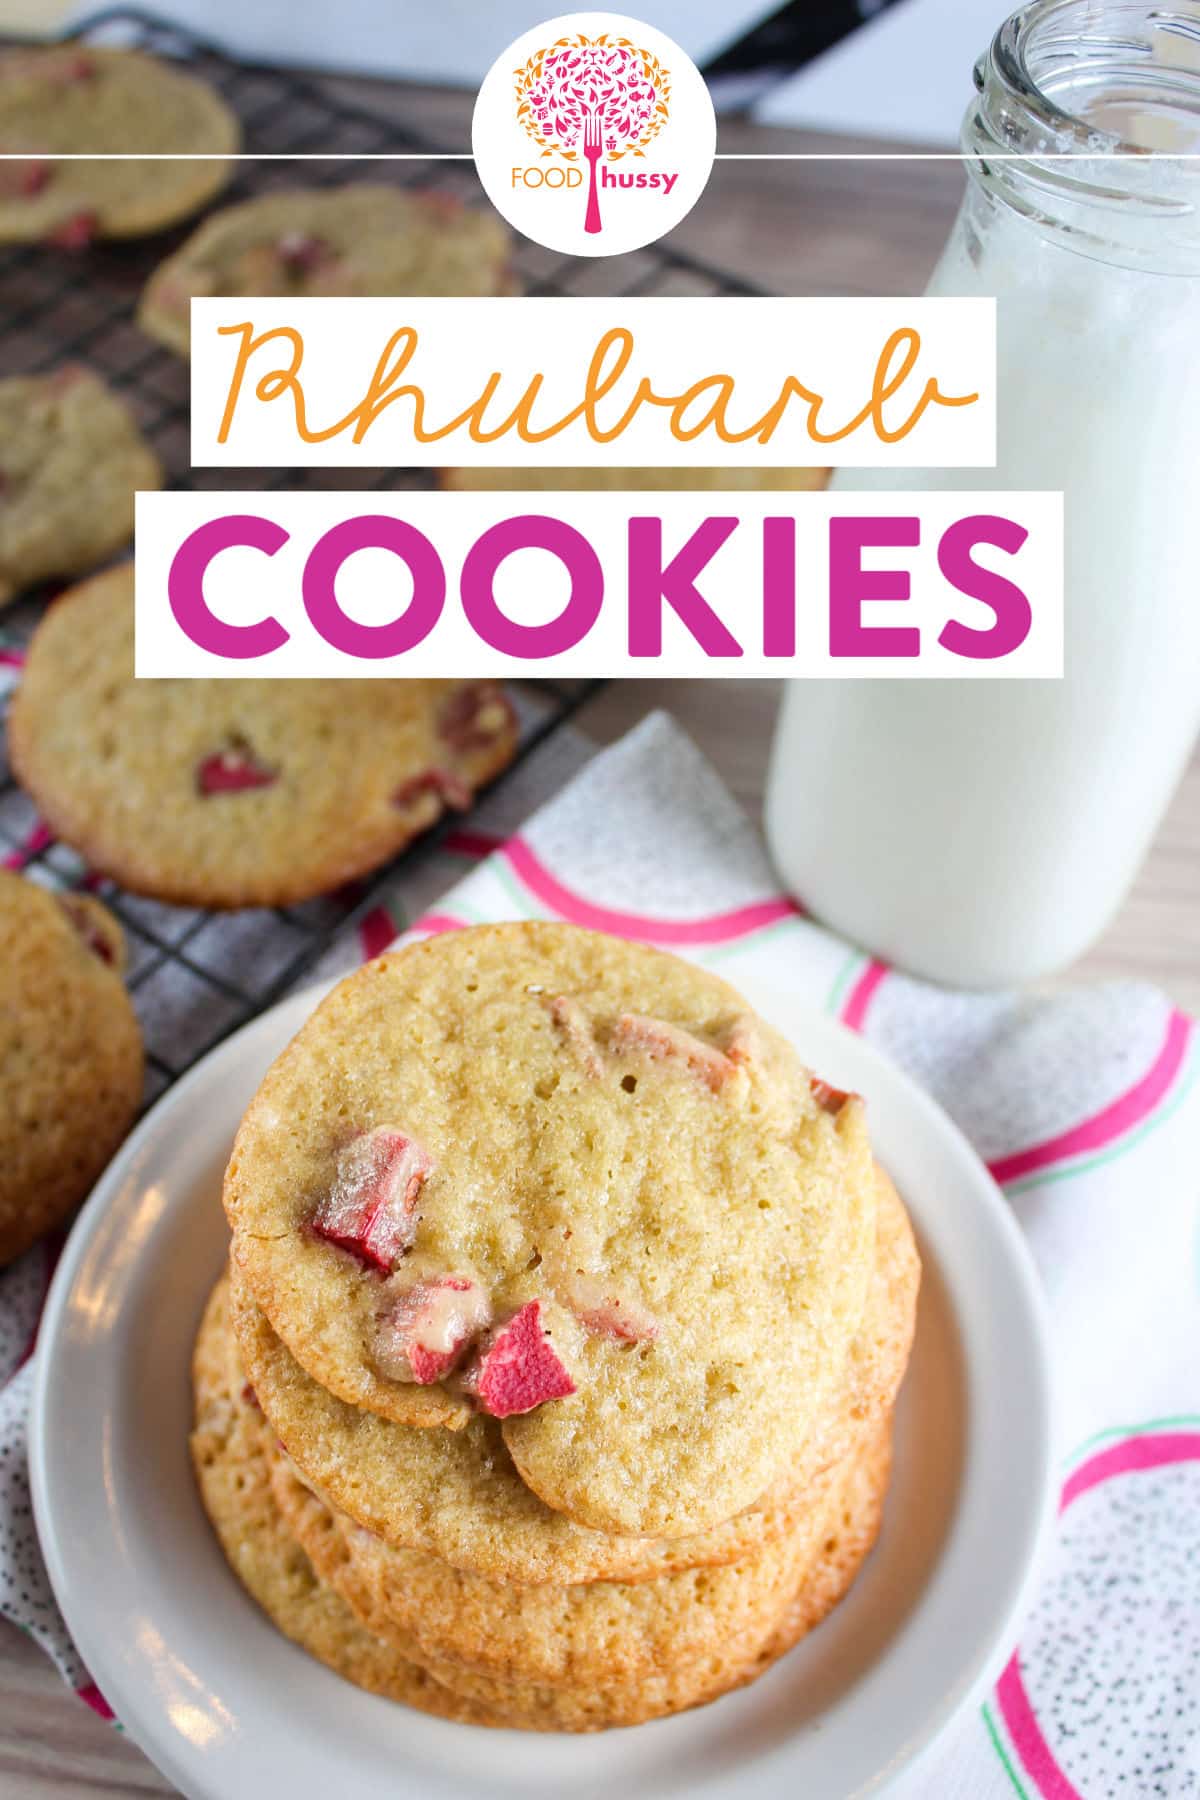 Rhubarb cookies are another delicious snack to make with your favorite summer fruit! These soft cookies with sweet & tart rhubarb will have everybody wanting more!   via @foodhussy